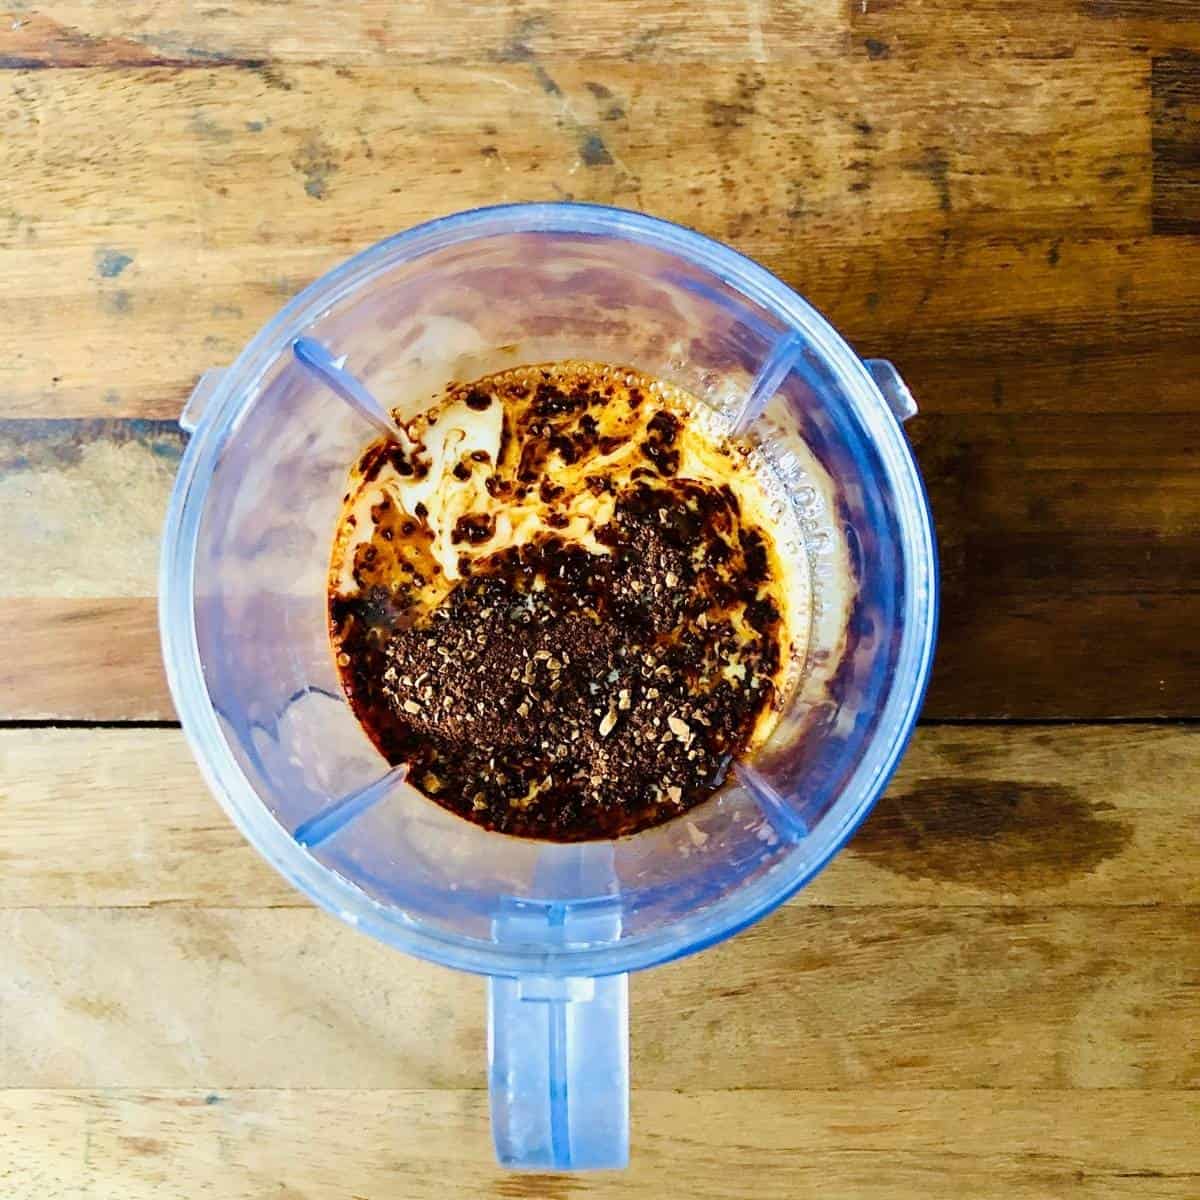 A blender cup containing dairy-free milk and instant coffee before mixing